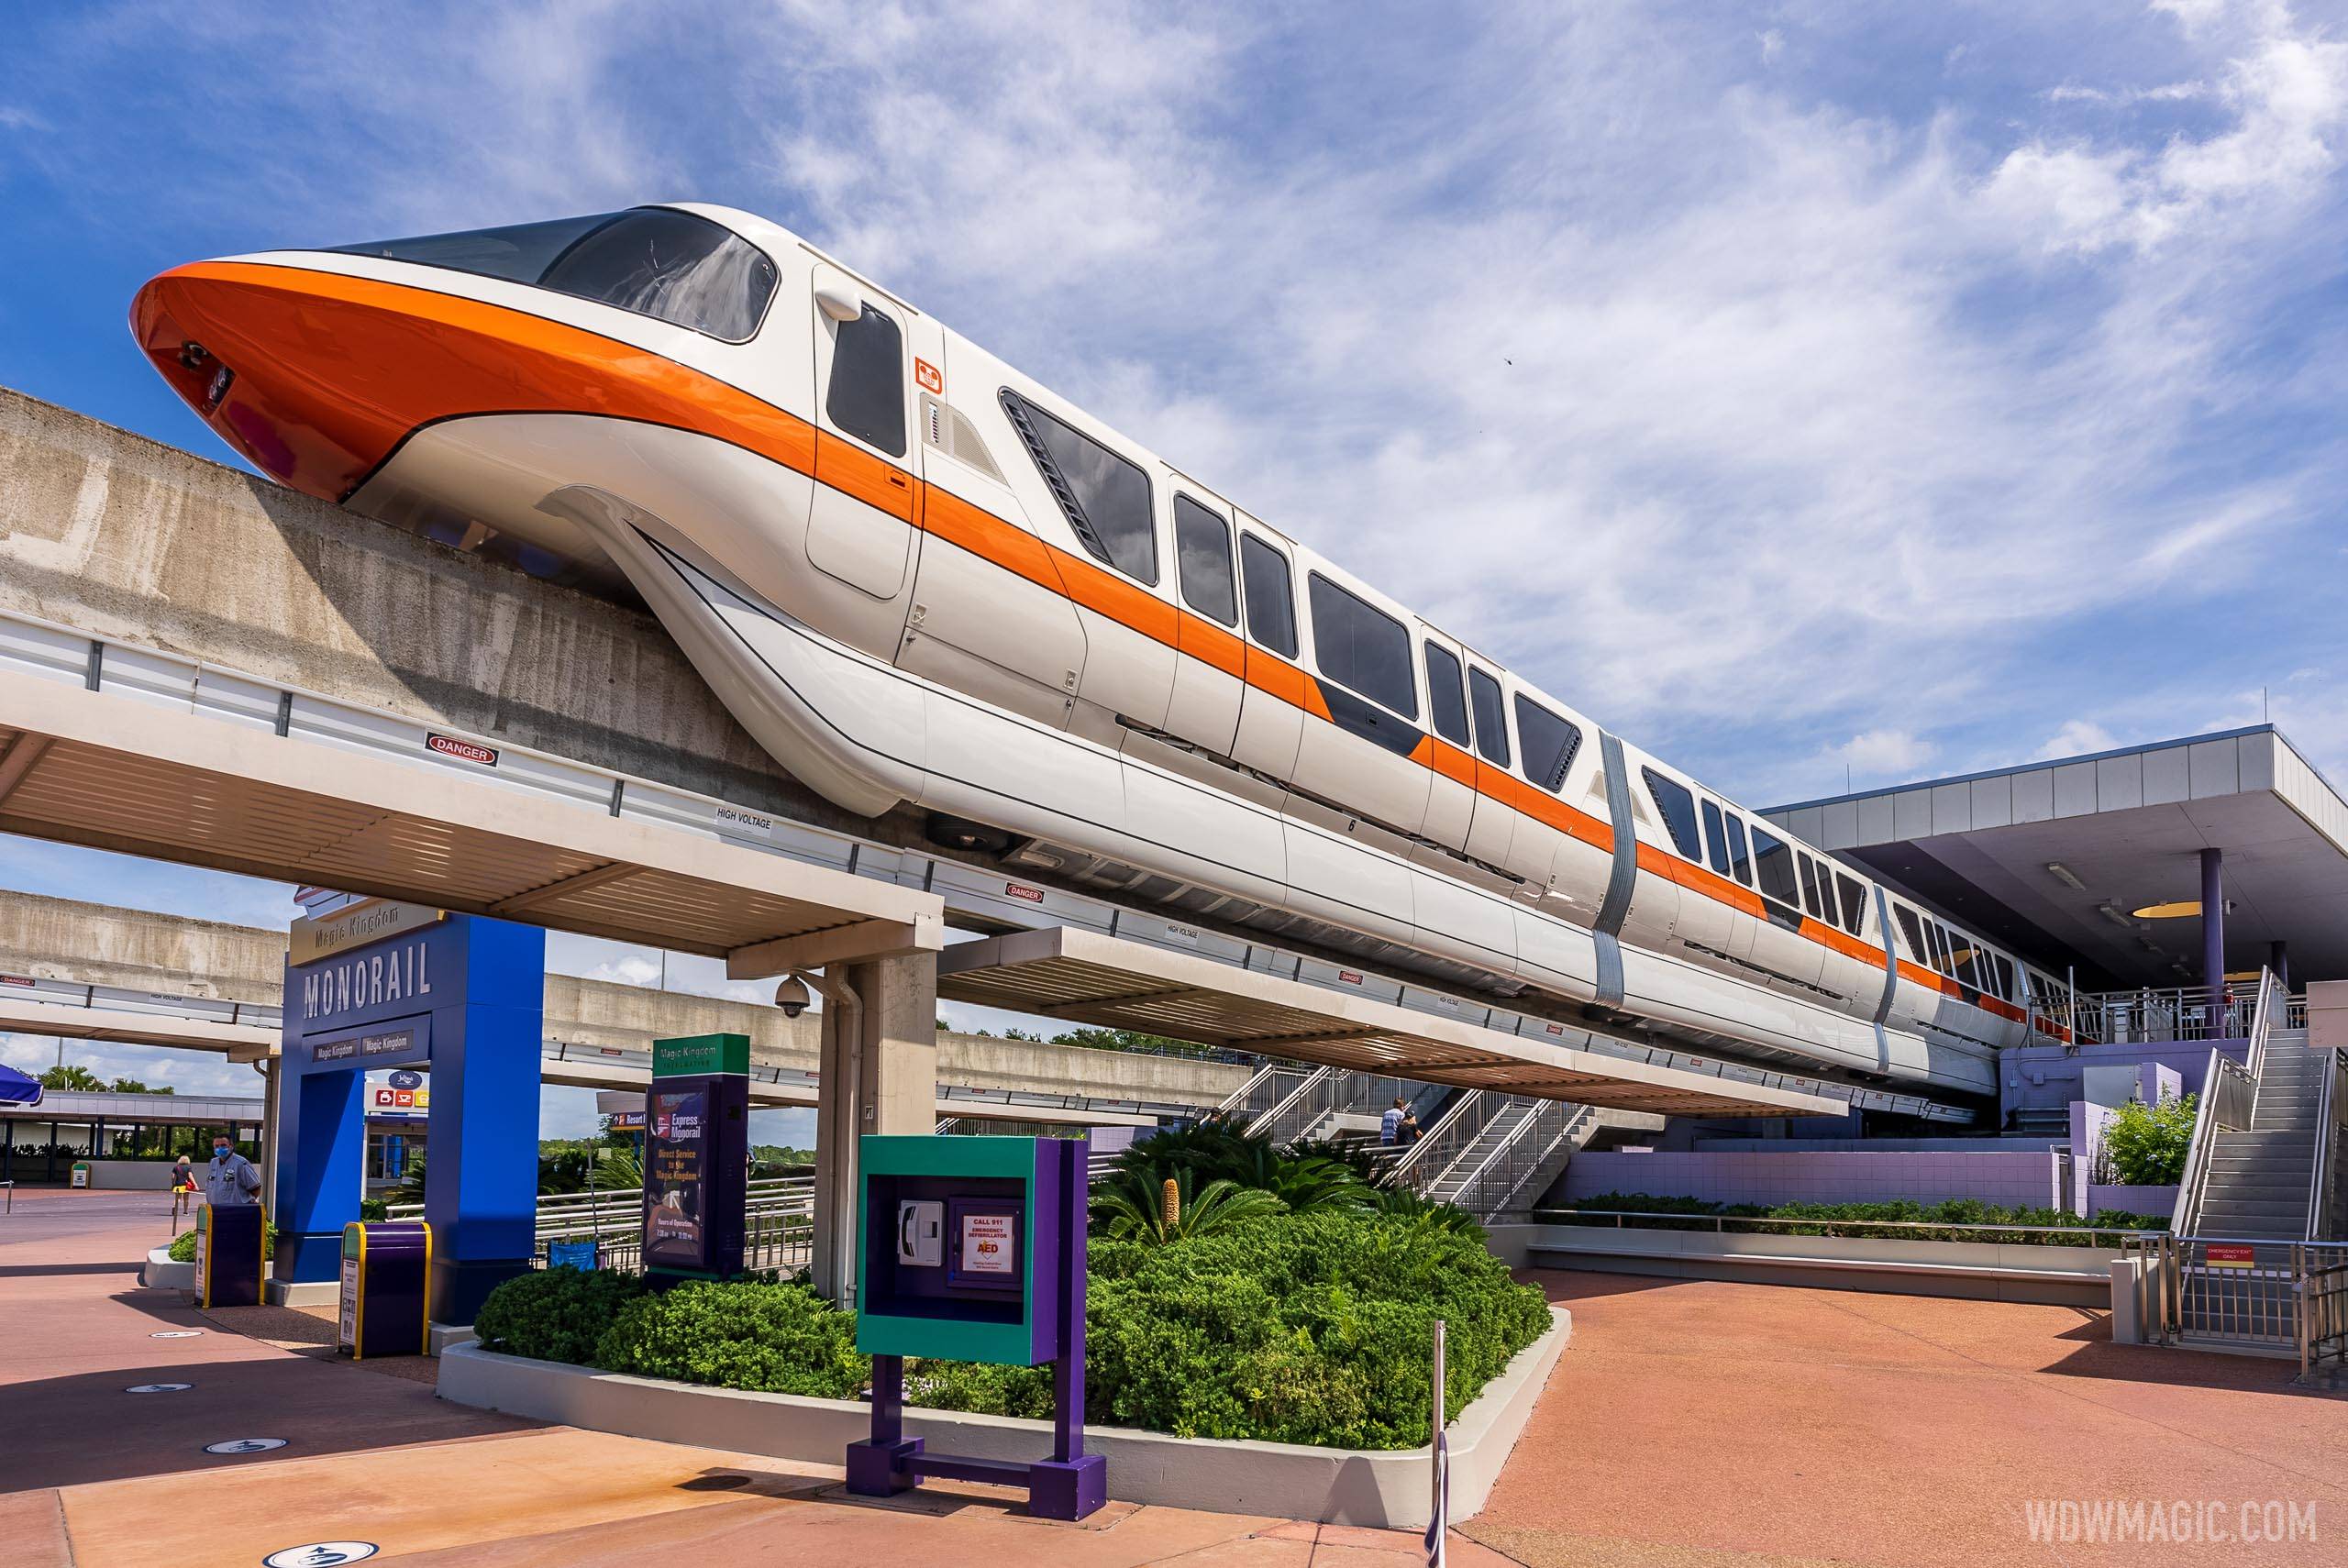 Masks are still required on Walt Disney World transportation systems including the monorail